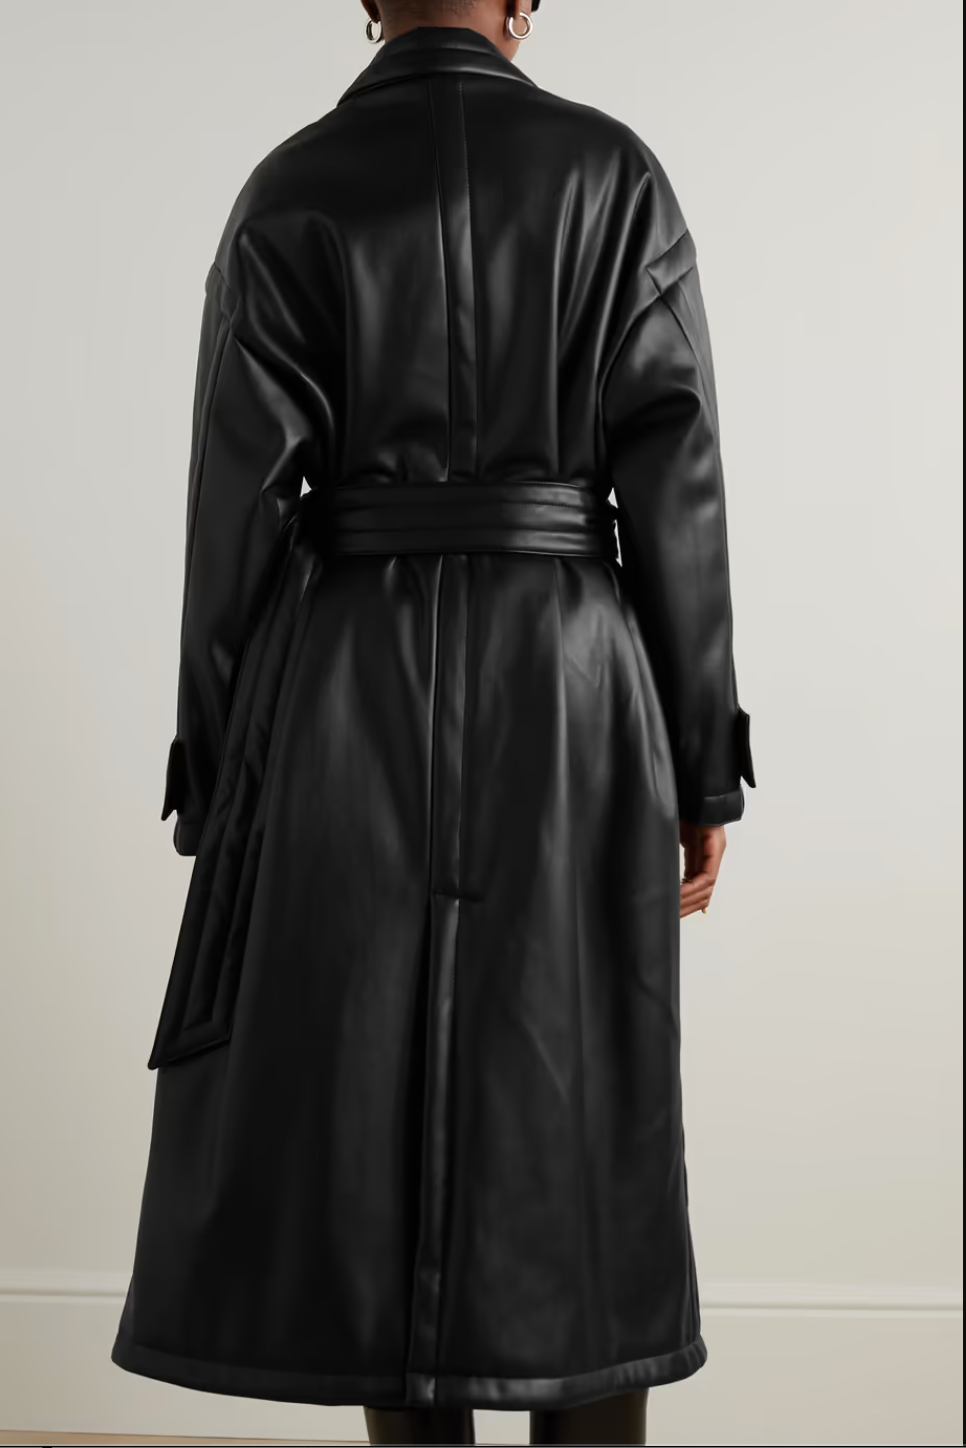 STAND STUDIO PADDED FAUX LEATHER TRENCH COAT